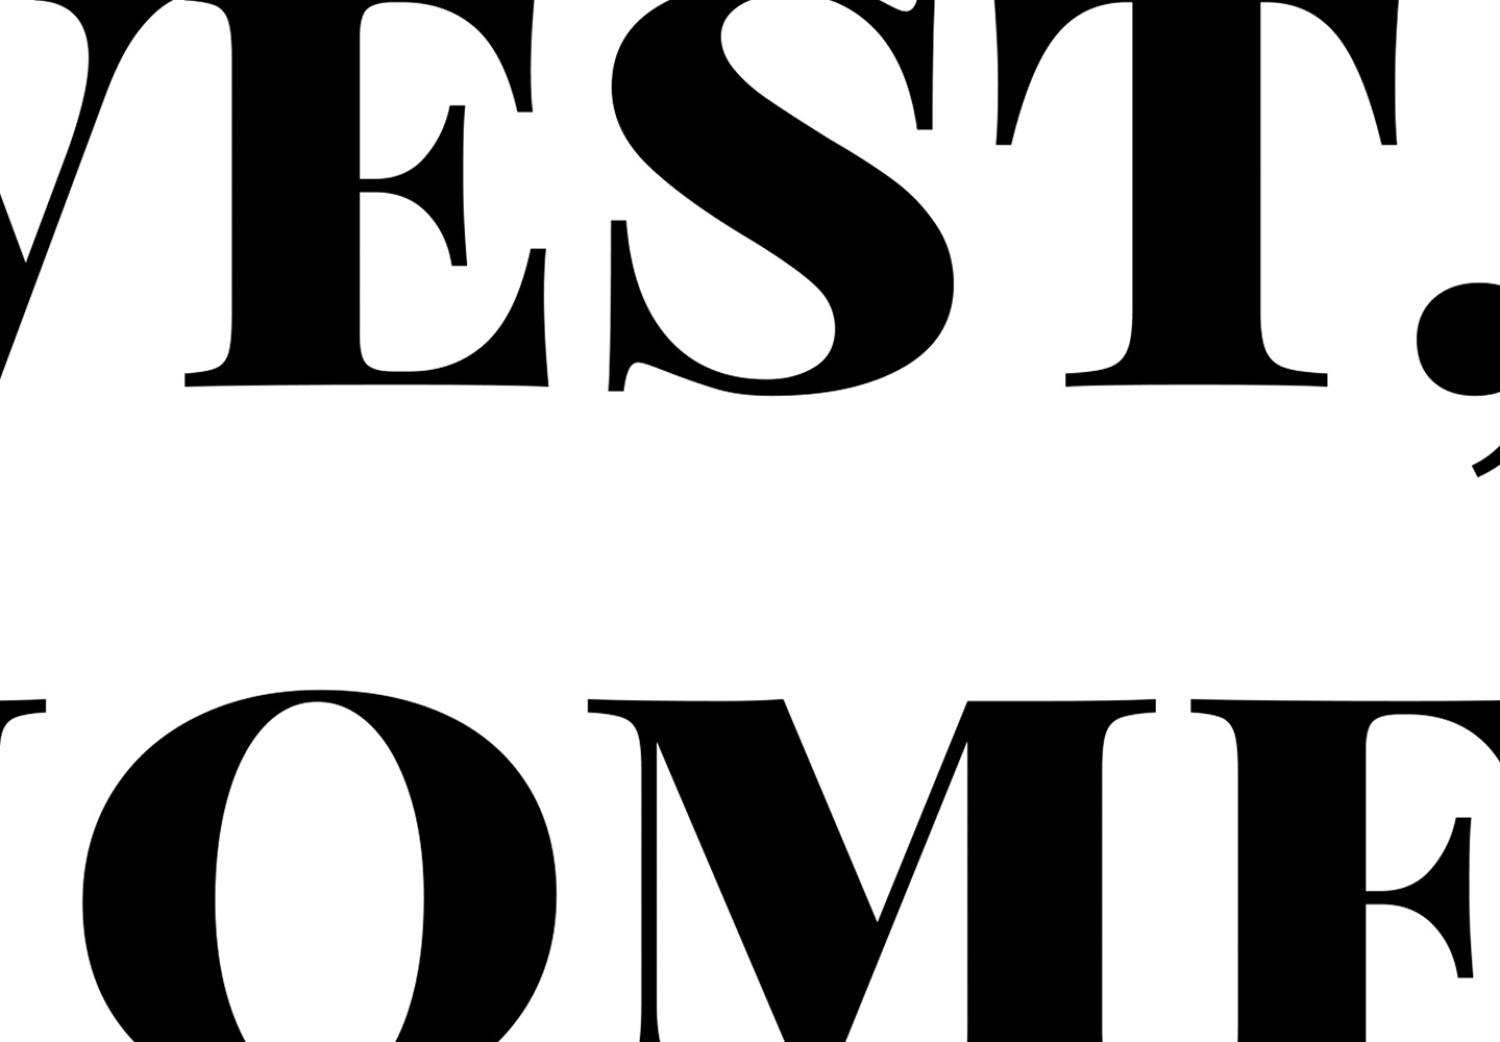 Canvas East or west, home is best English quote - black and white lettering